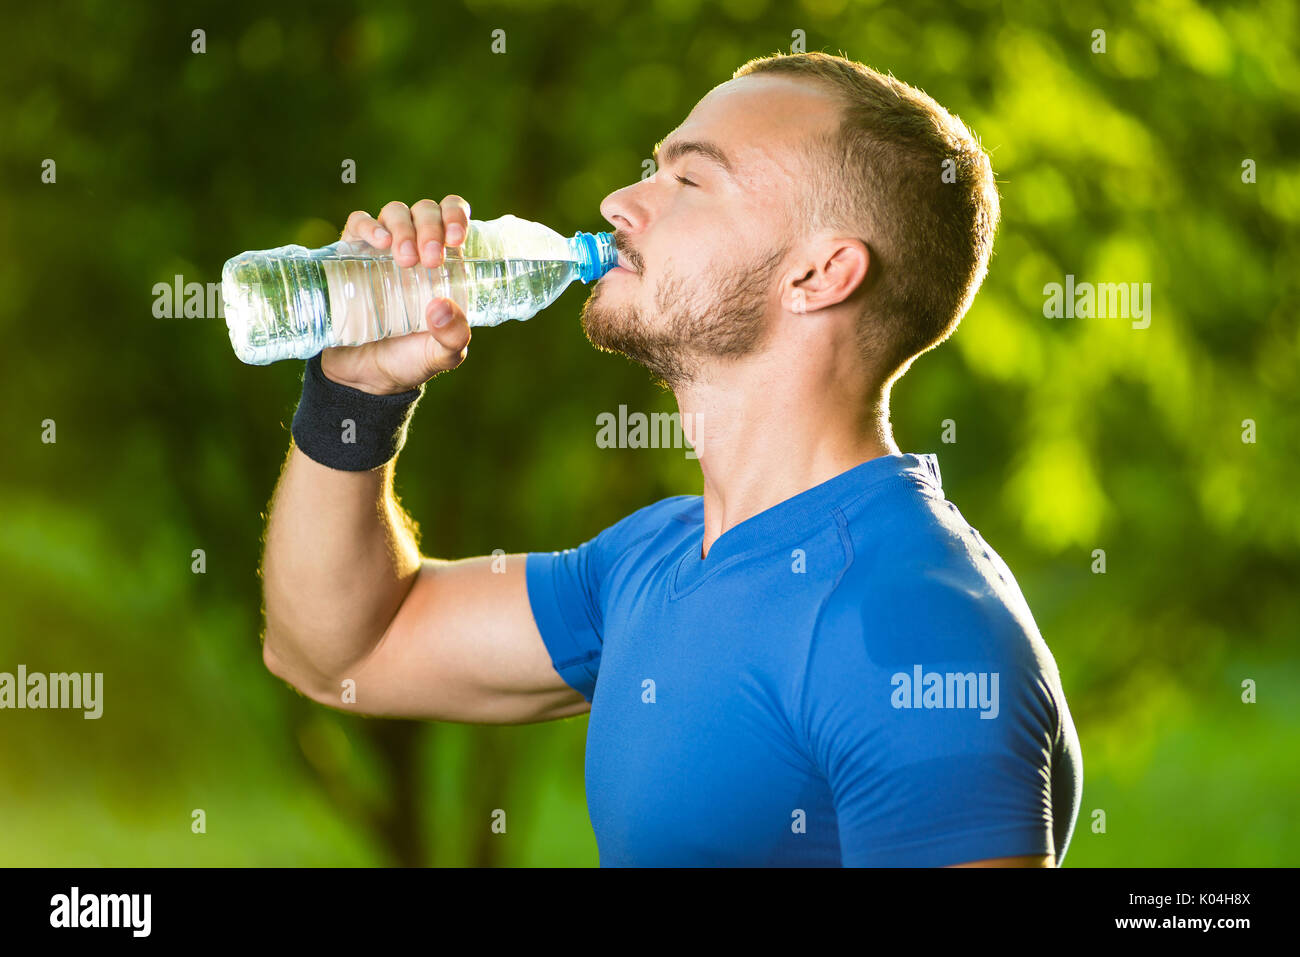 https://c8.alamy.com/comp/K04H8X/athletic-mature-man-drinking-water-from-a-bottle-K04H8X.jpg